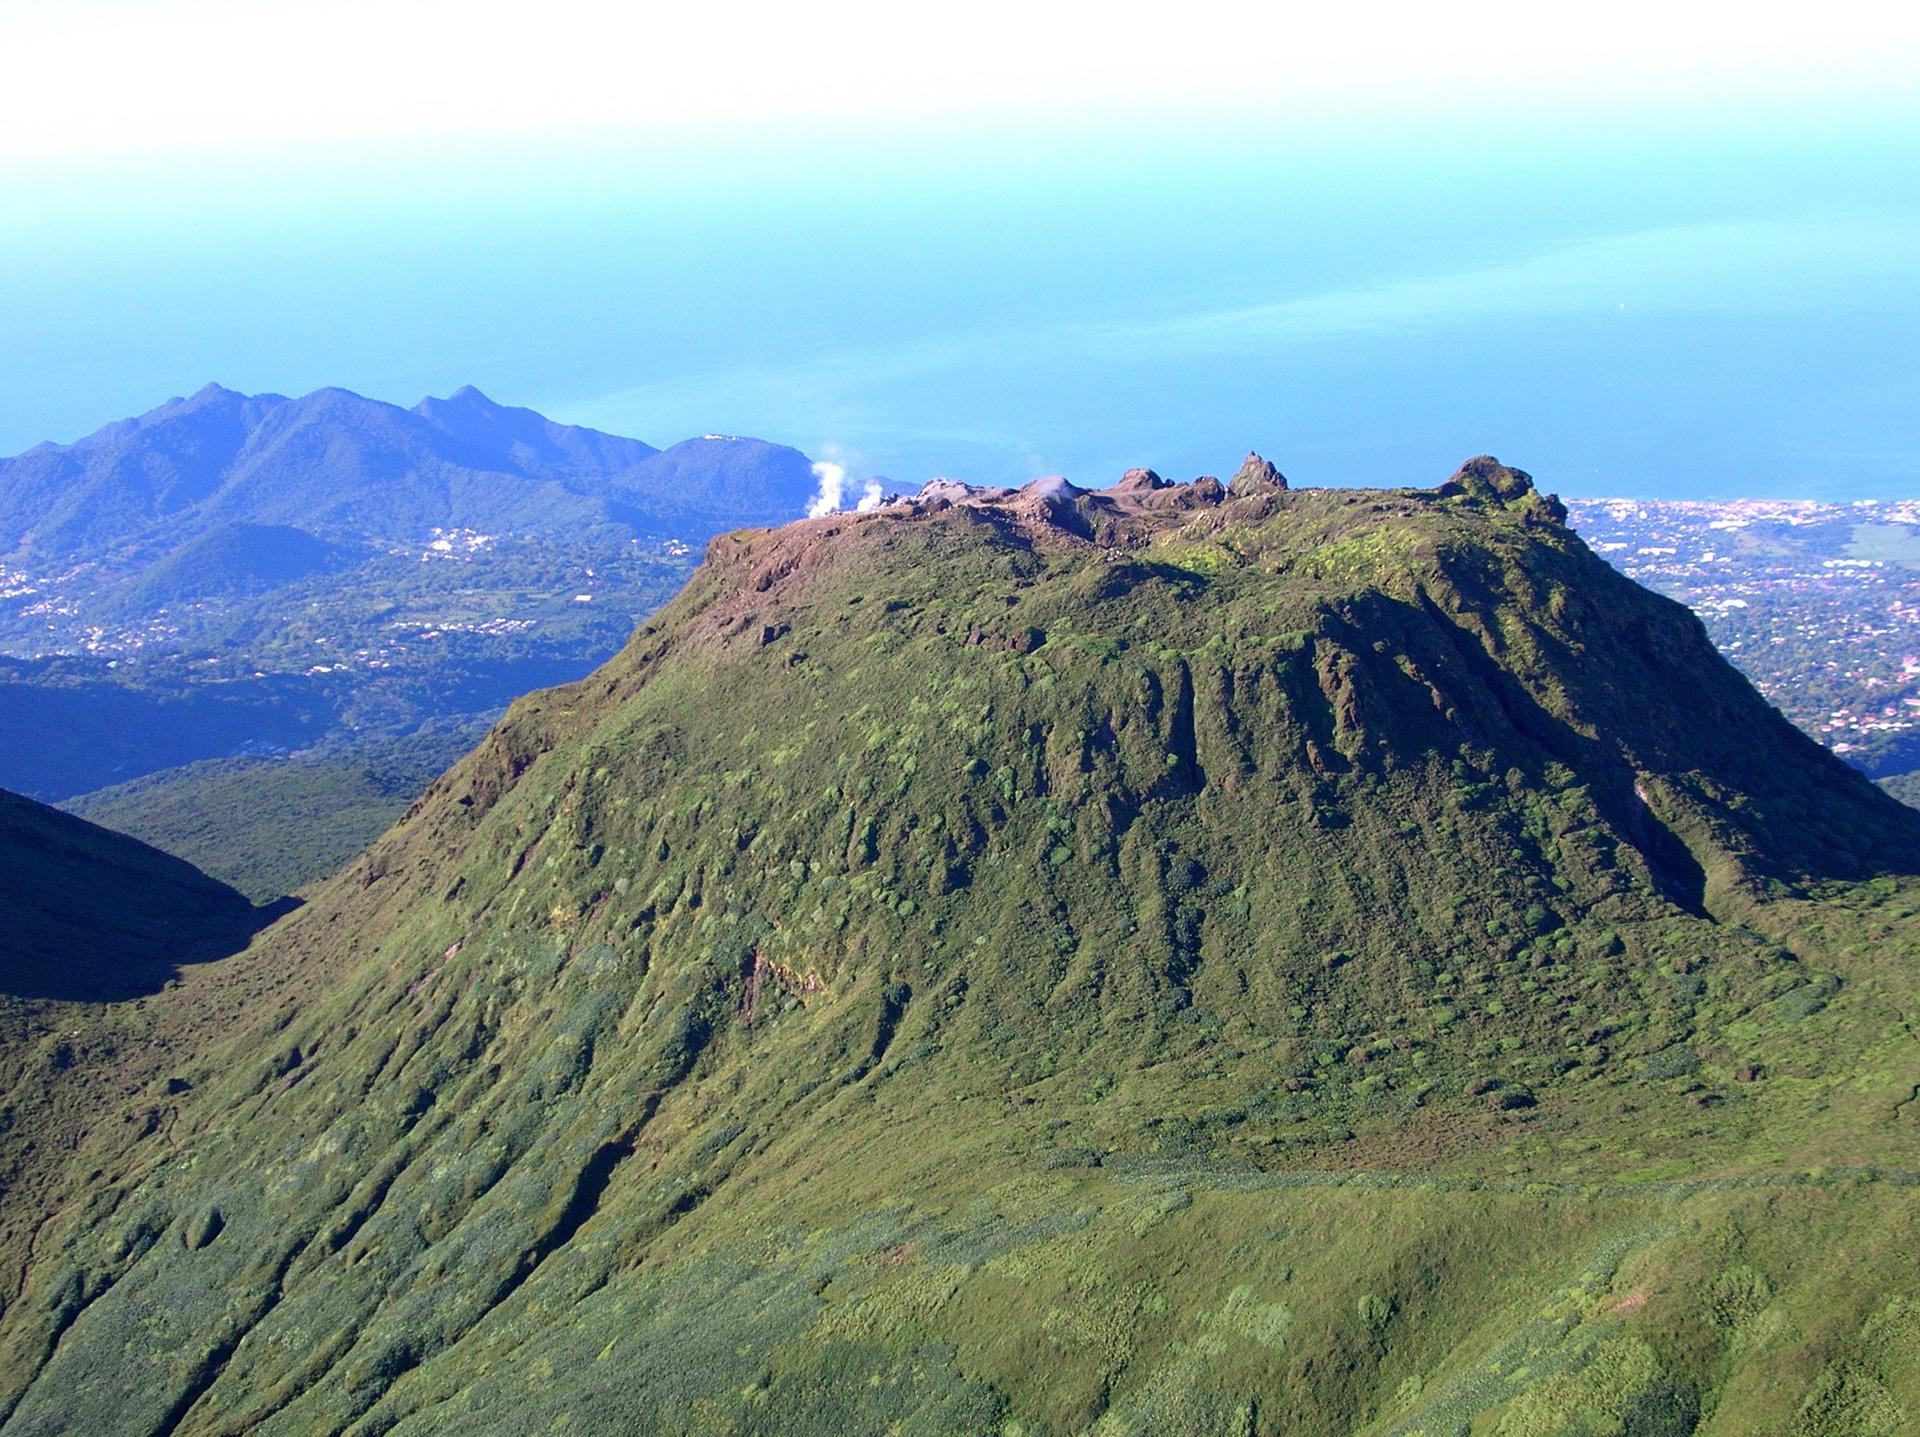 The Soufrière volcano, Guadeloupe 